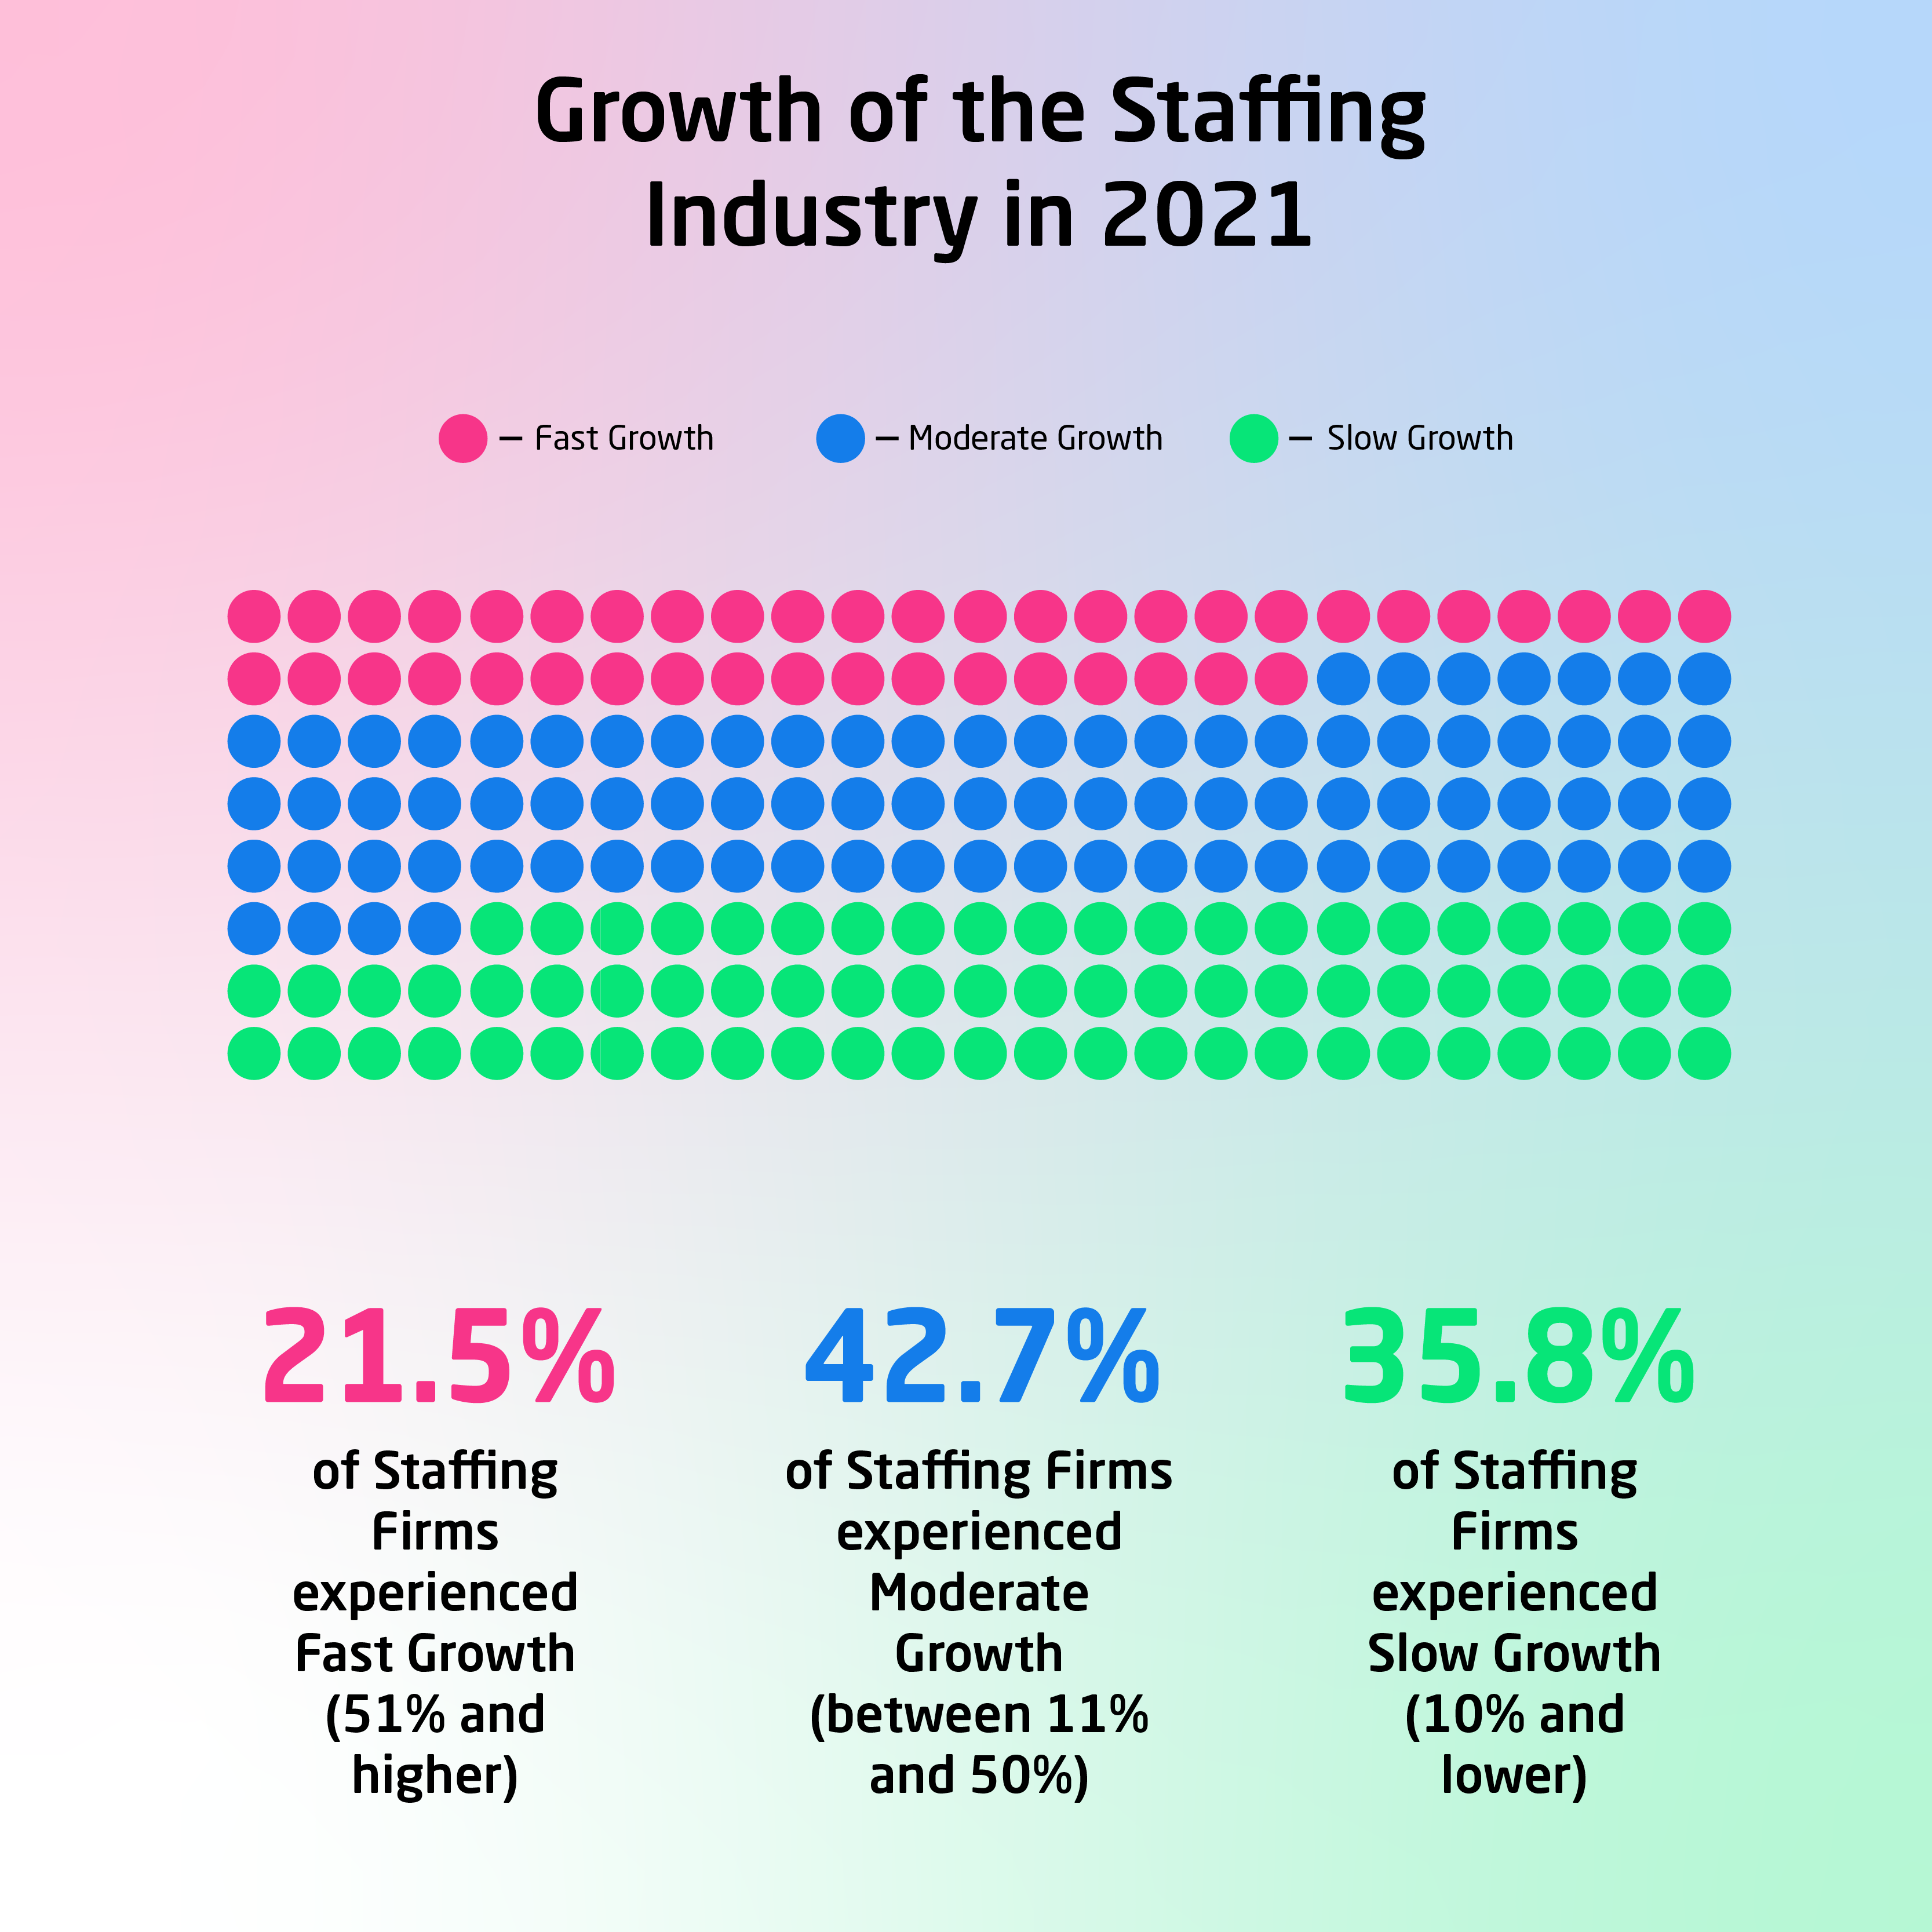 Infographic showing the growth of the staffing industry over 2021, based on surveys of staffing professionals.